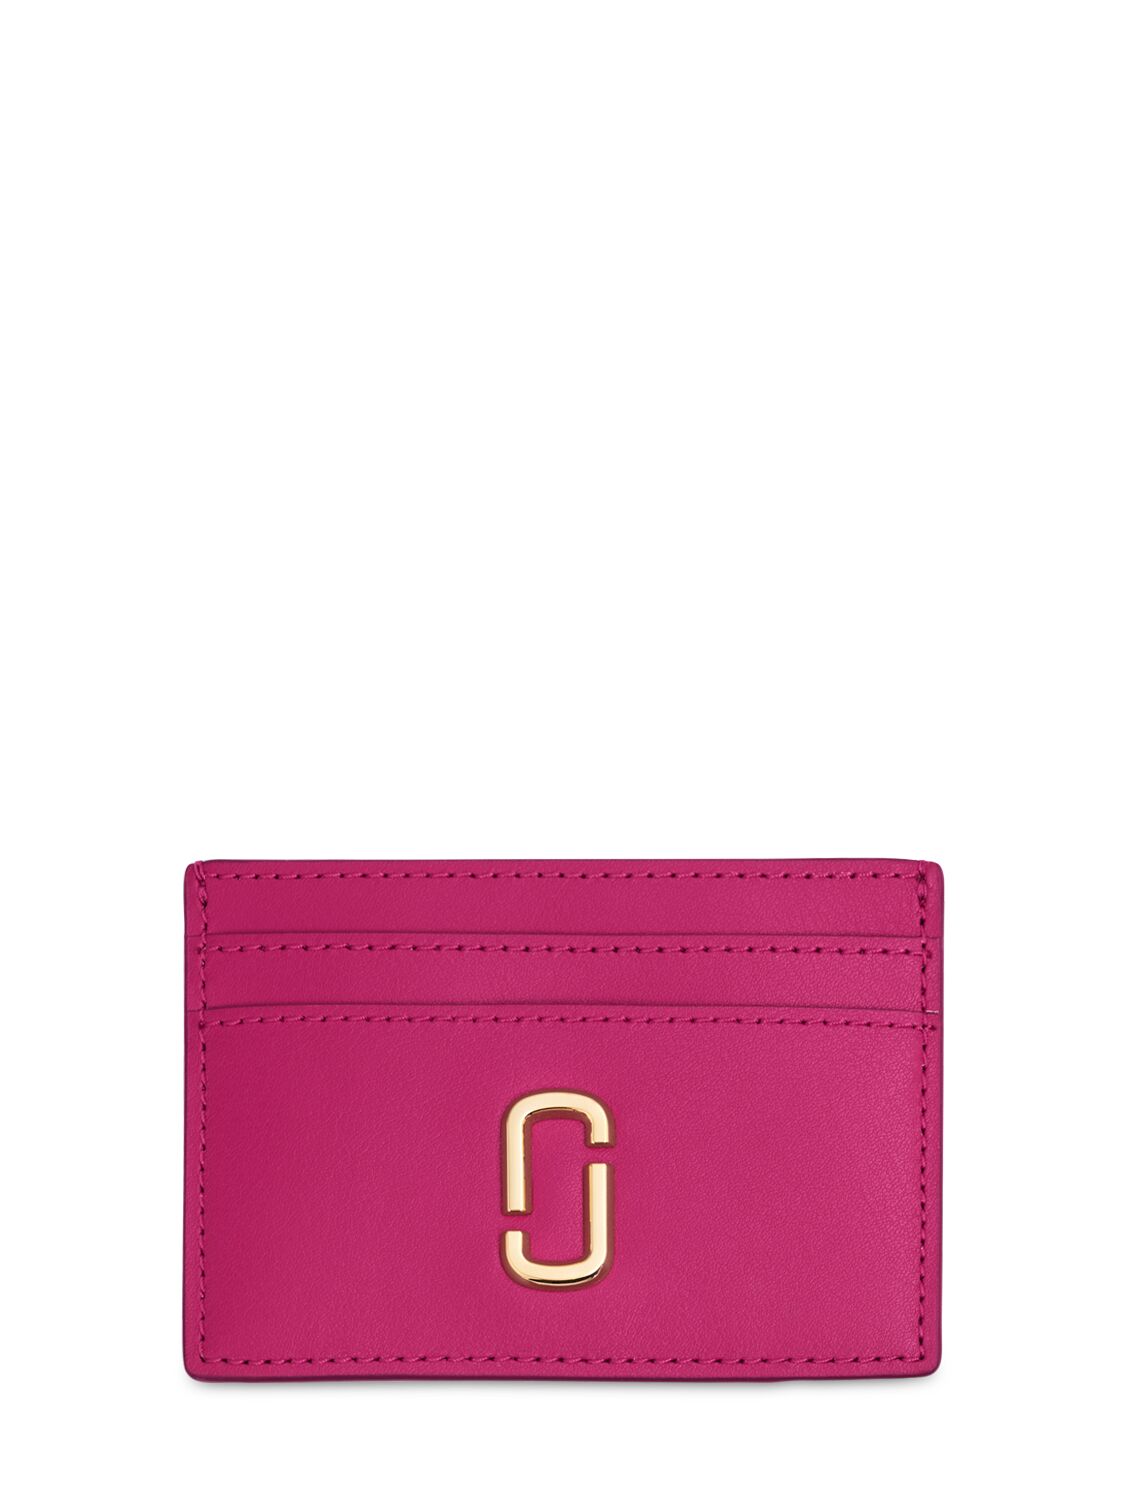 Marc Jacobs Leather Card Holder In Lipstick Pink